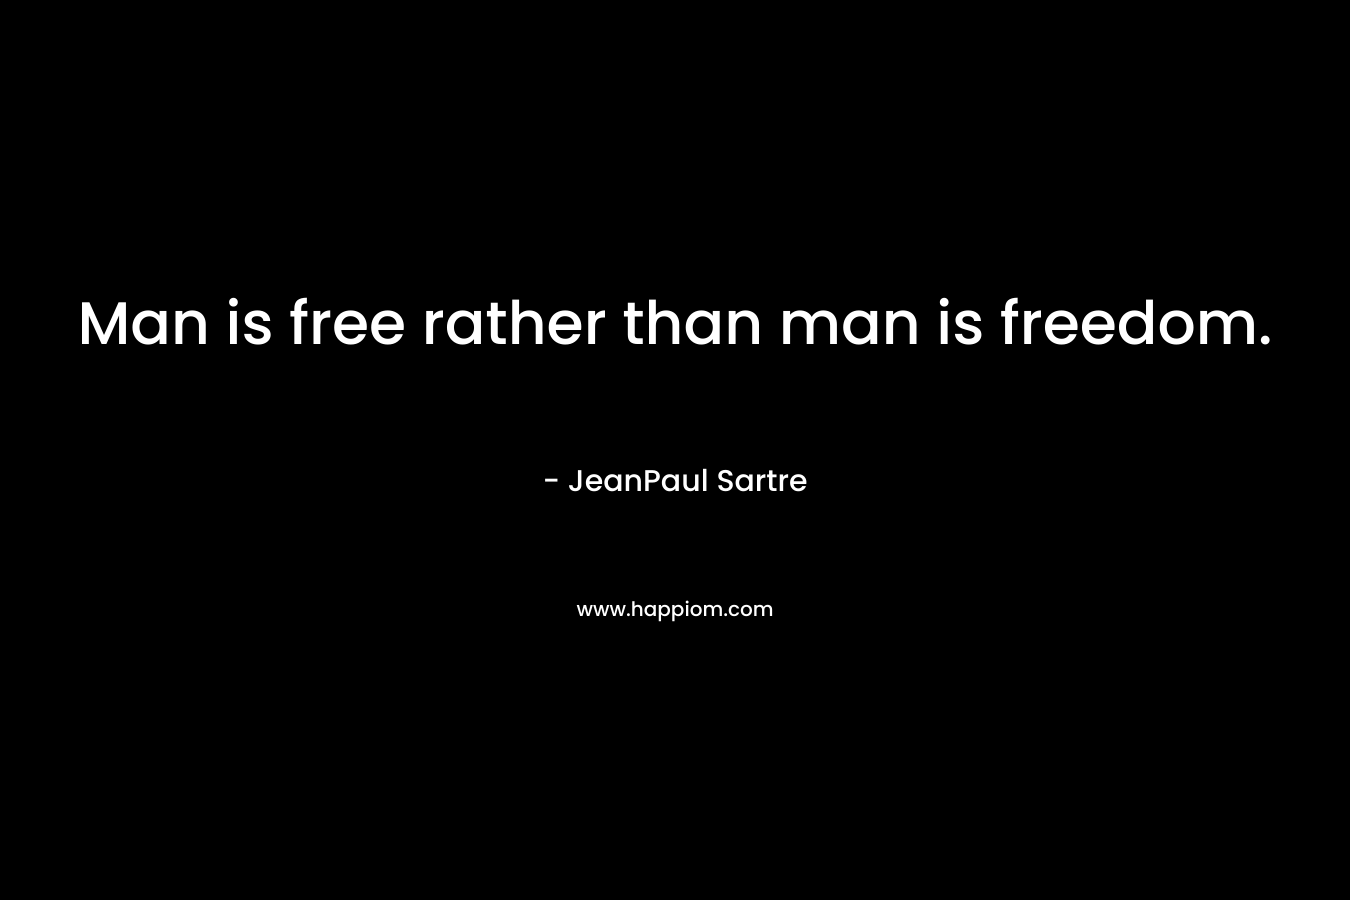 Man is free rather than man is freedom.